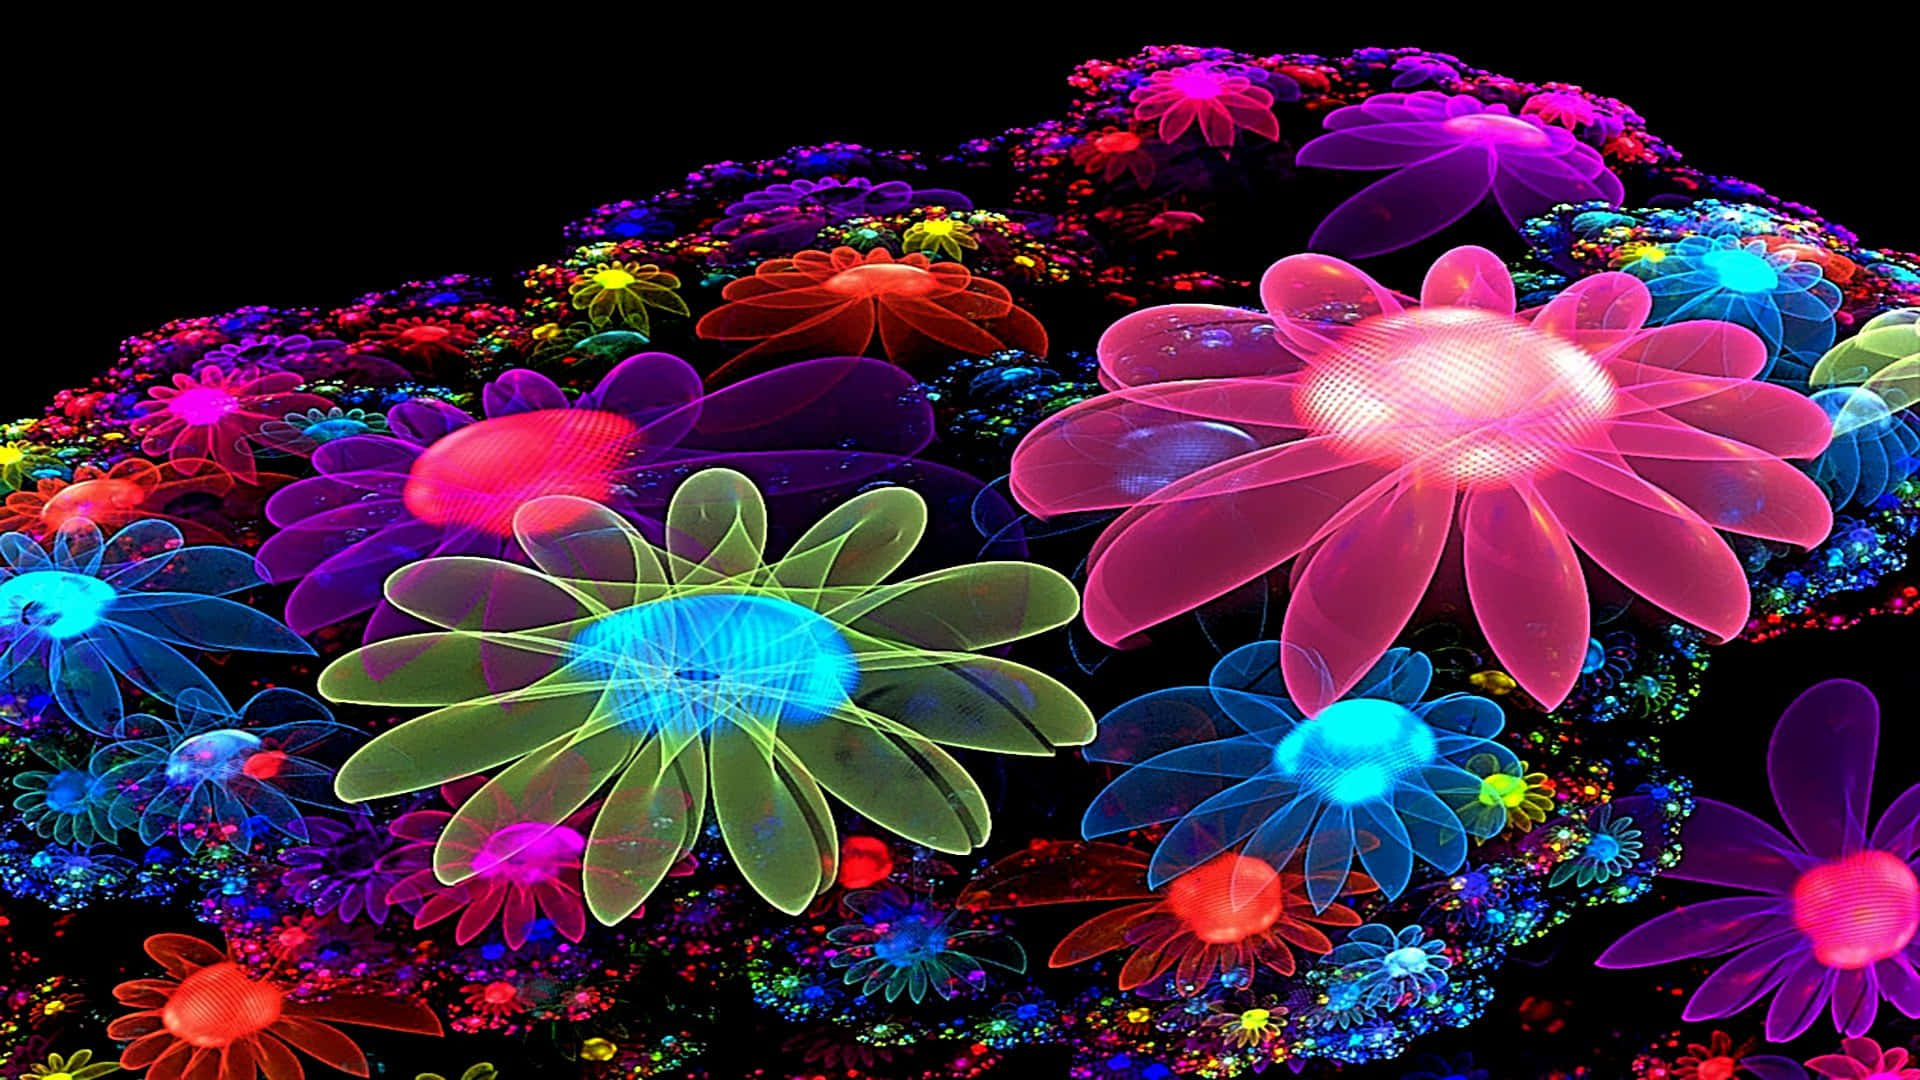 A beautiful vibrant display of neon flowers in bloom Wallpaper